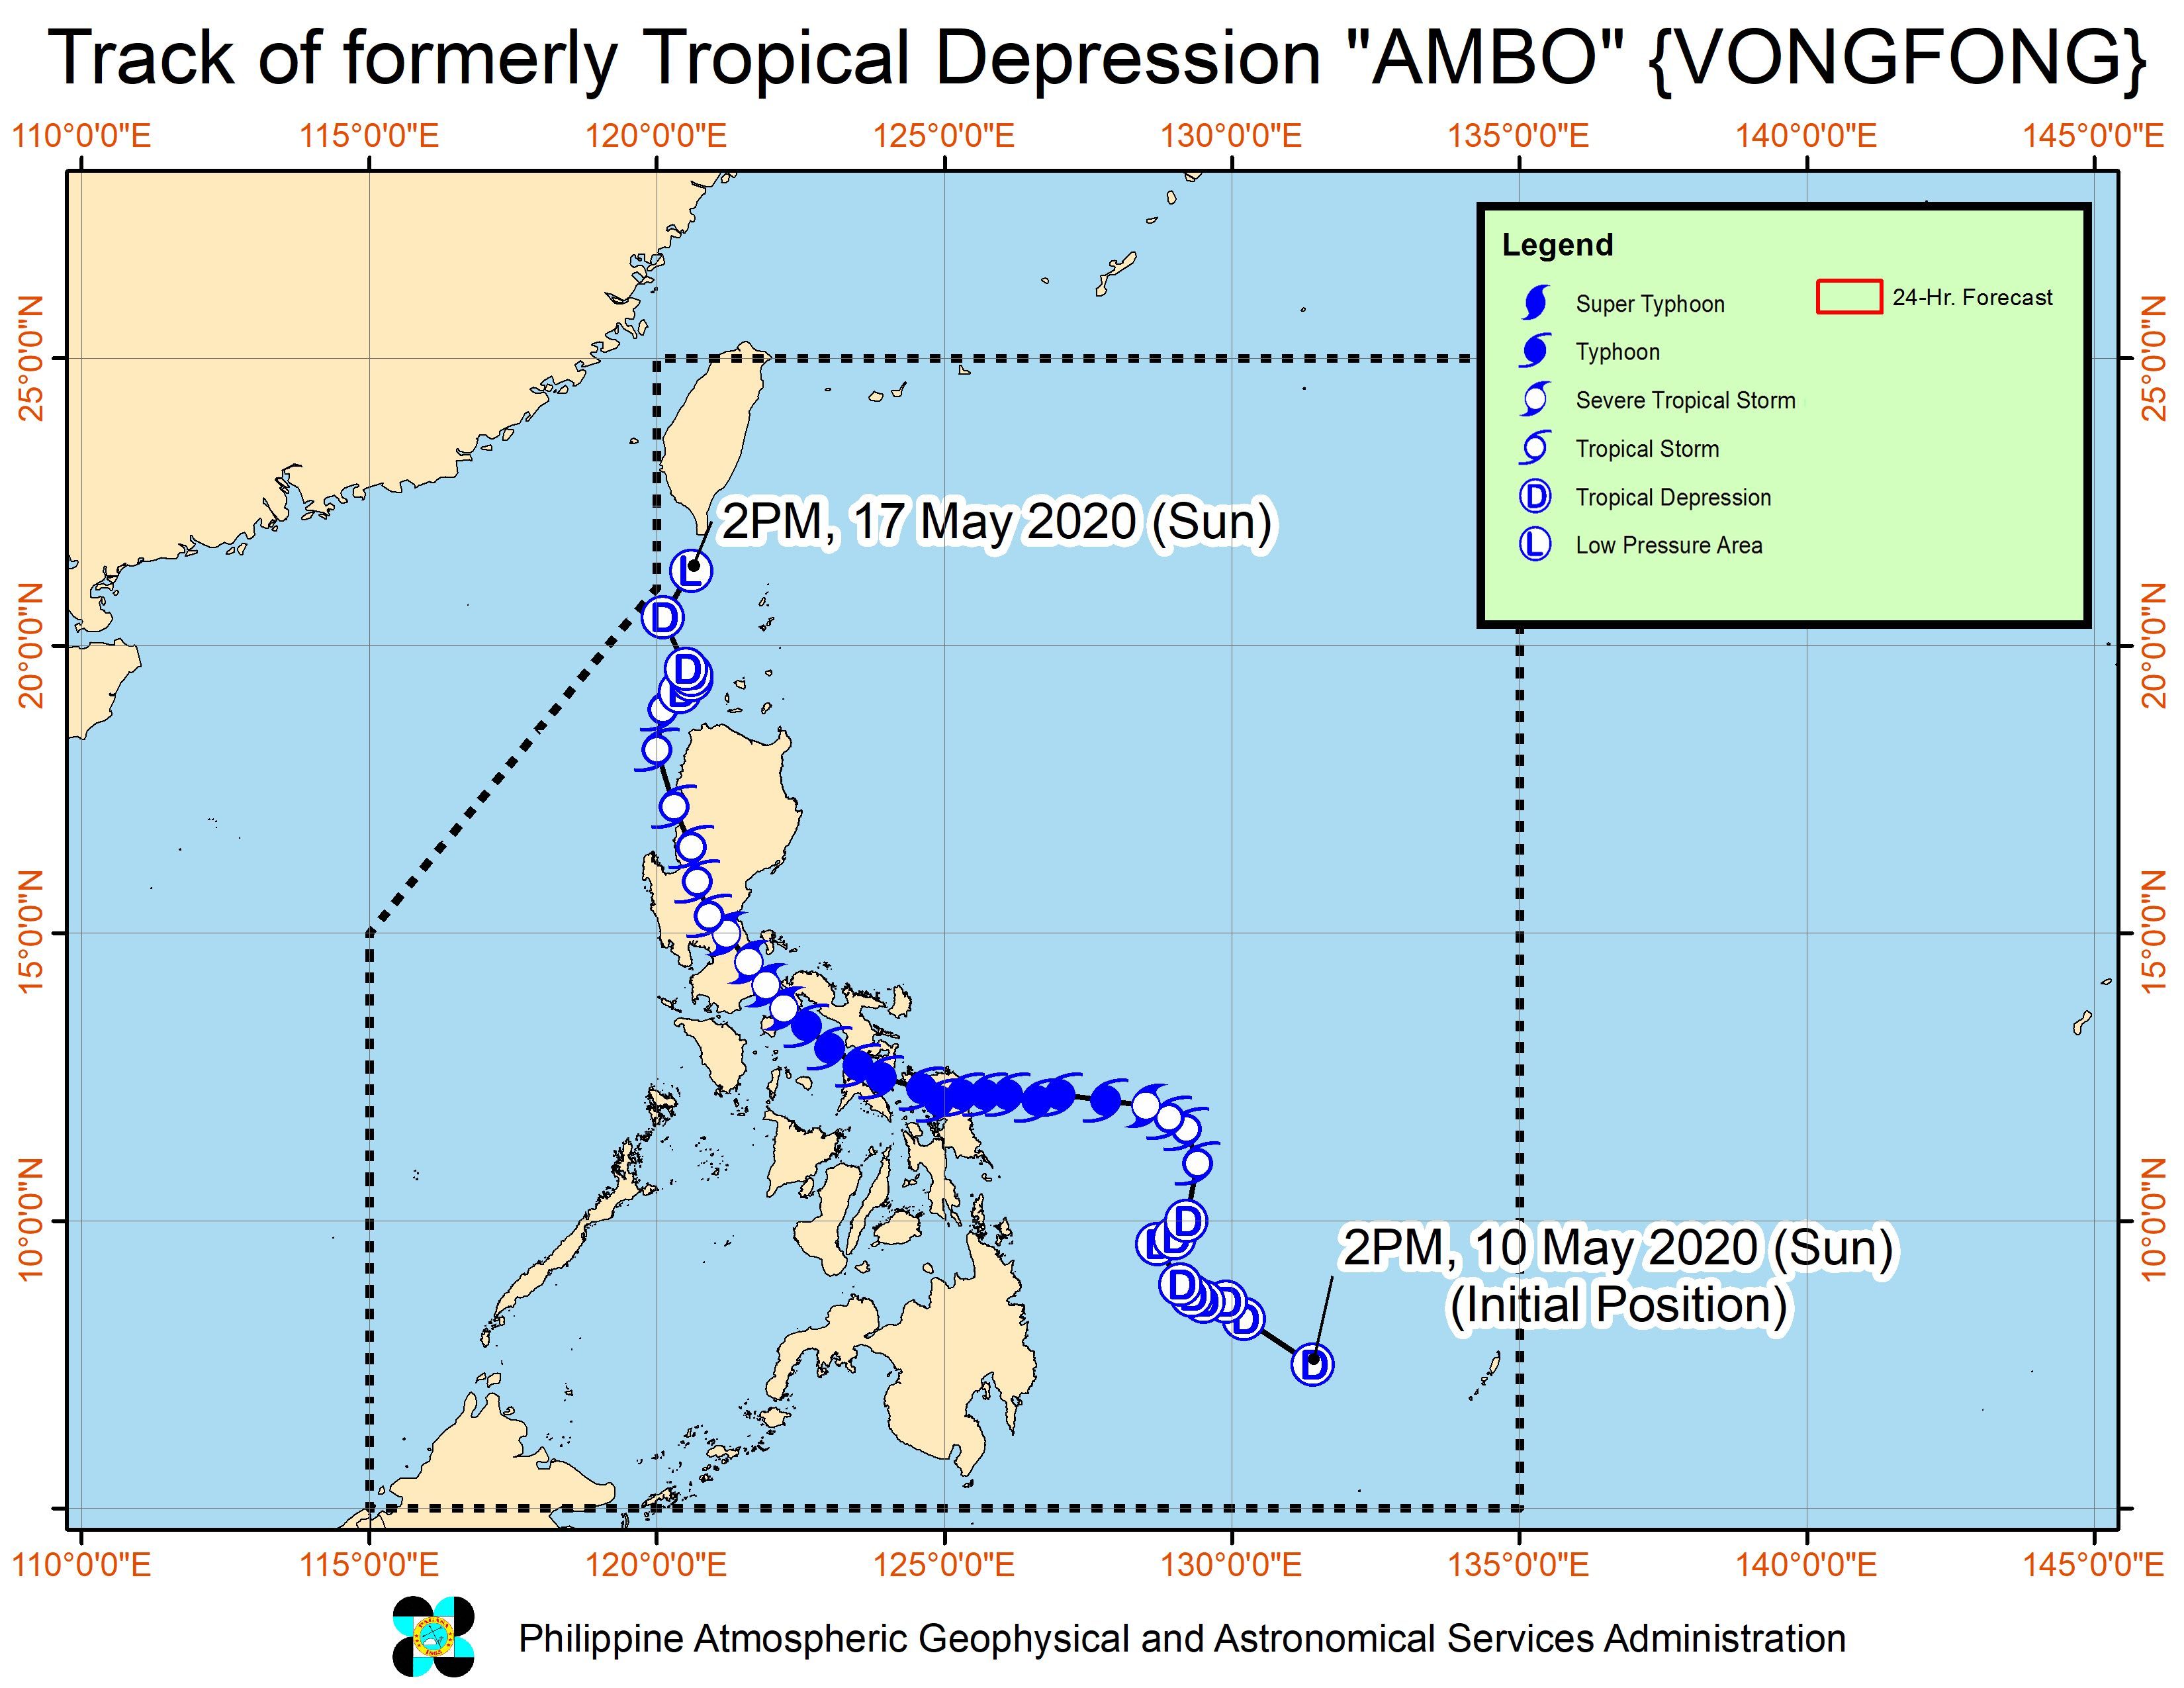 Forecast track of the low pressure area which used to be Ambo (Vongfong), as of May 17, 2020, 5 pm. Image from PAGASA 